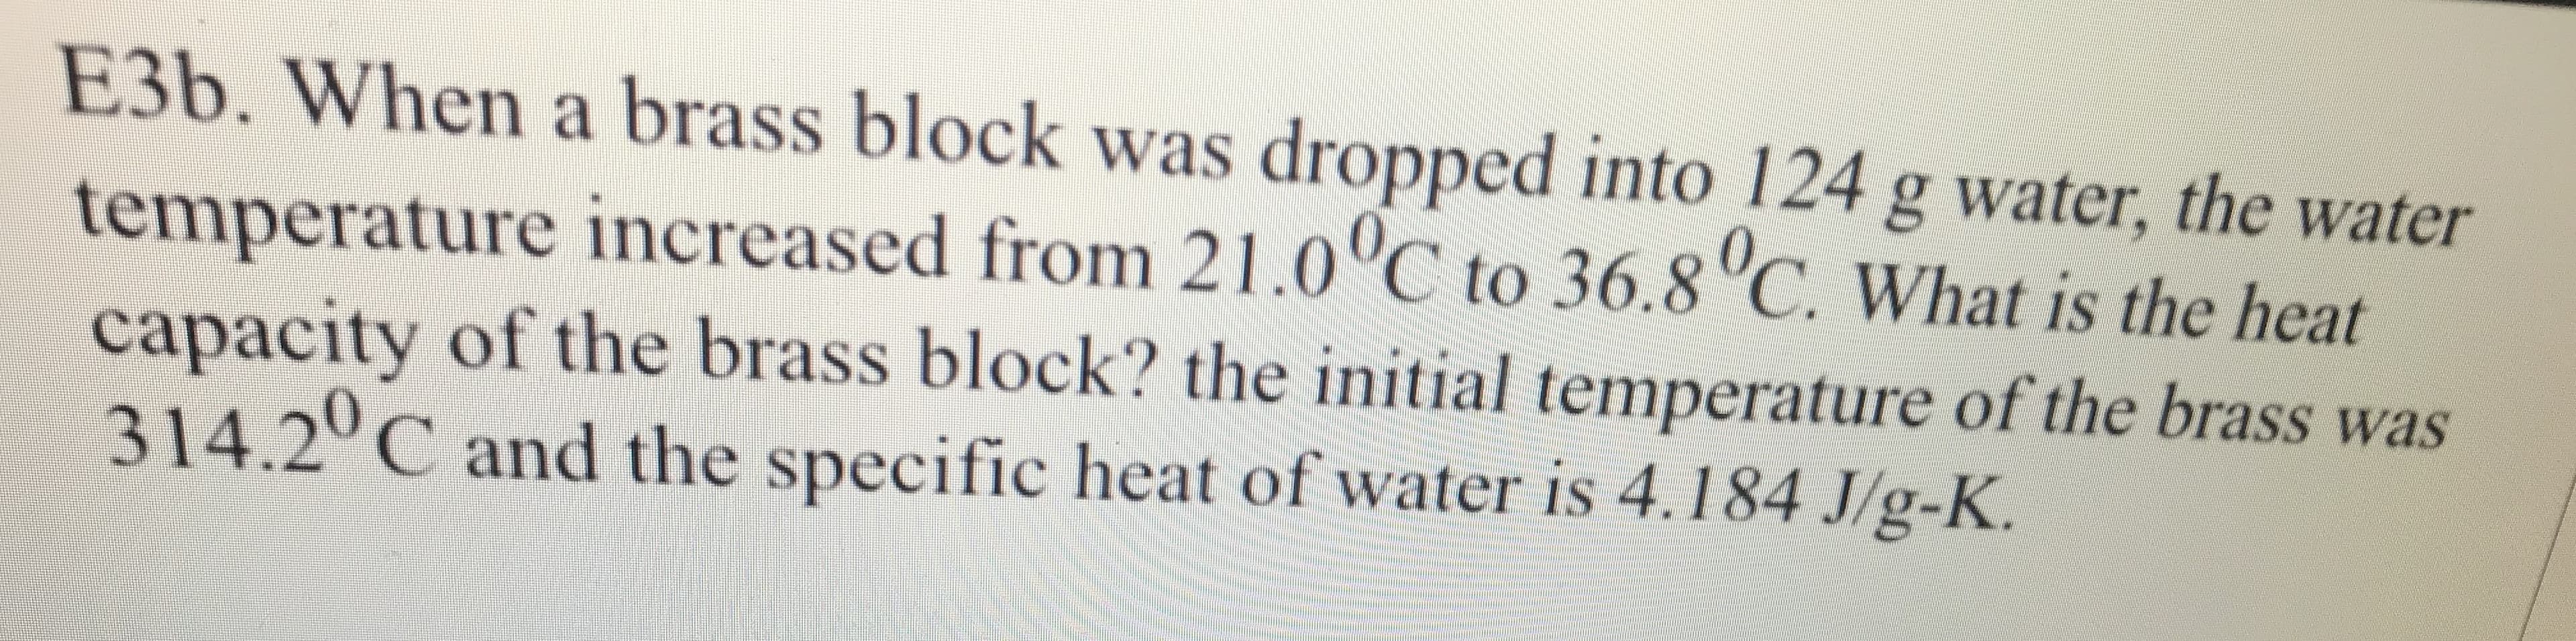 E3b. When a brass block was dropped into 124 g water, the water
temperature increased from 21.0 C to 36.8 C. What is the heat
capacity of the brass block? the initial temperature of the brass was
314.2 C and the specific heat of water is 4.184 J/g-K
